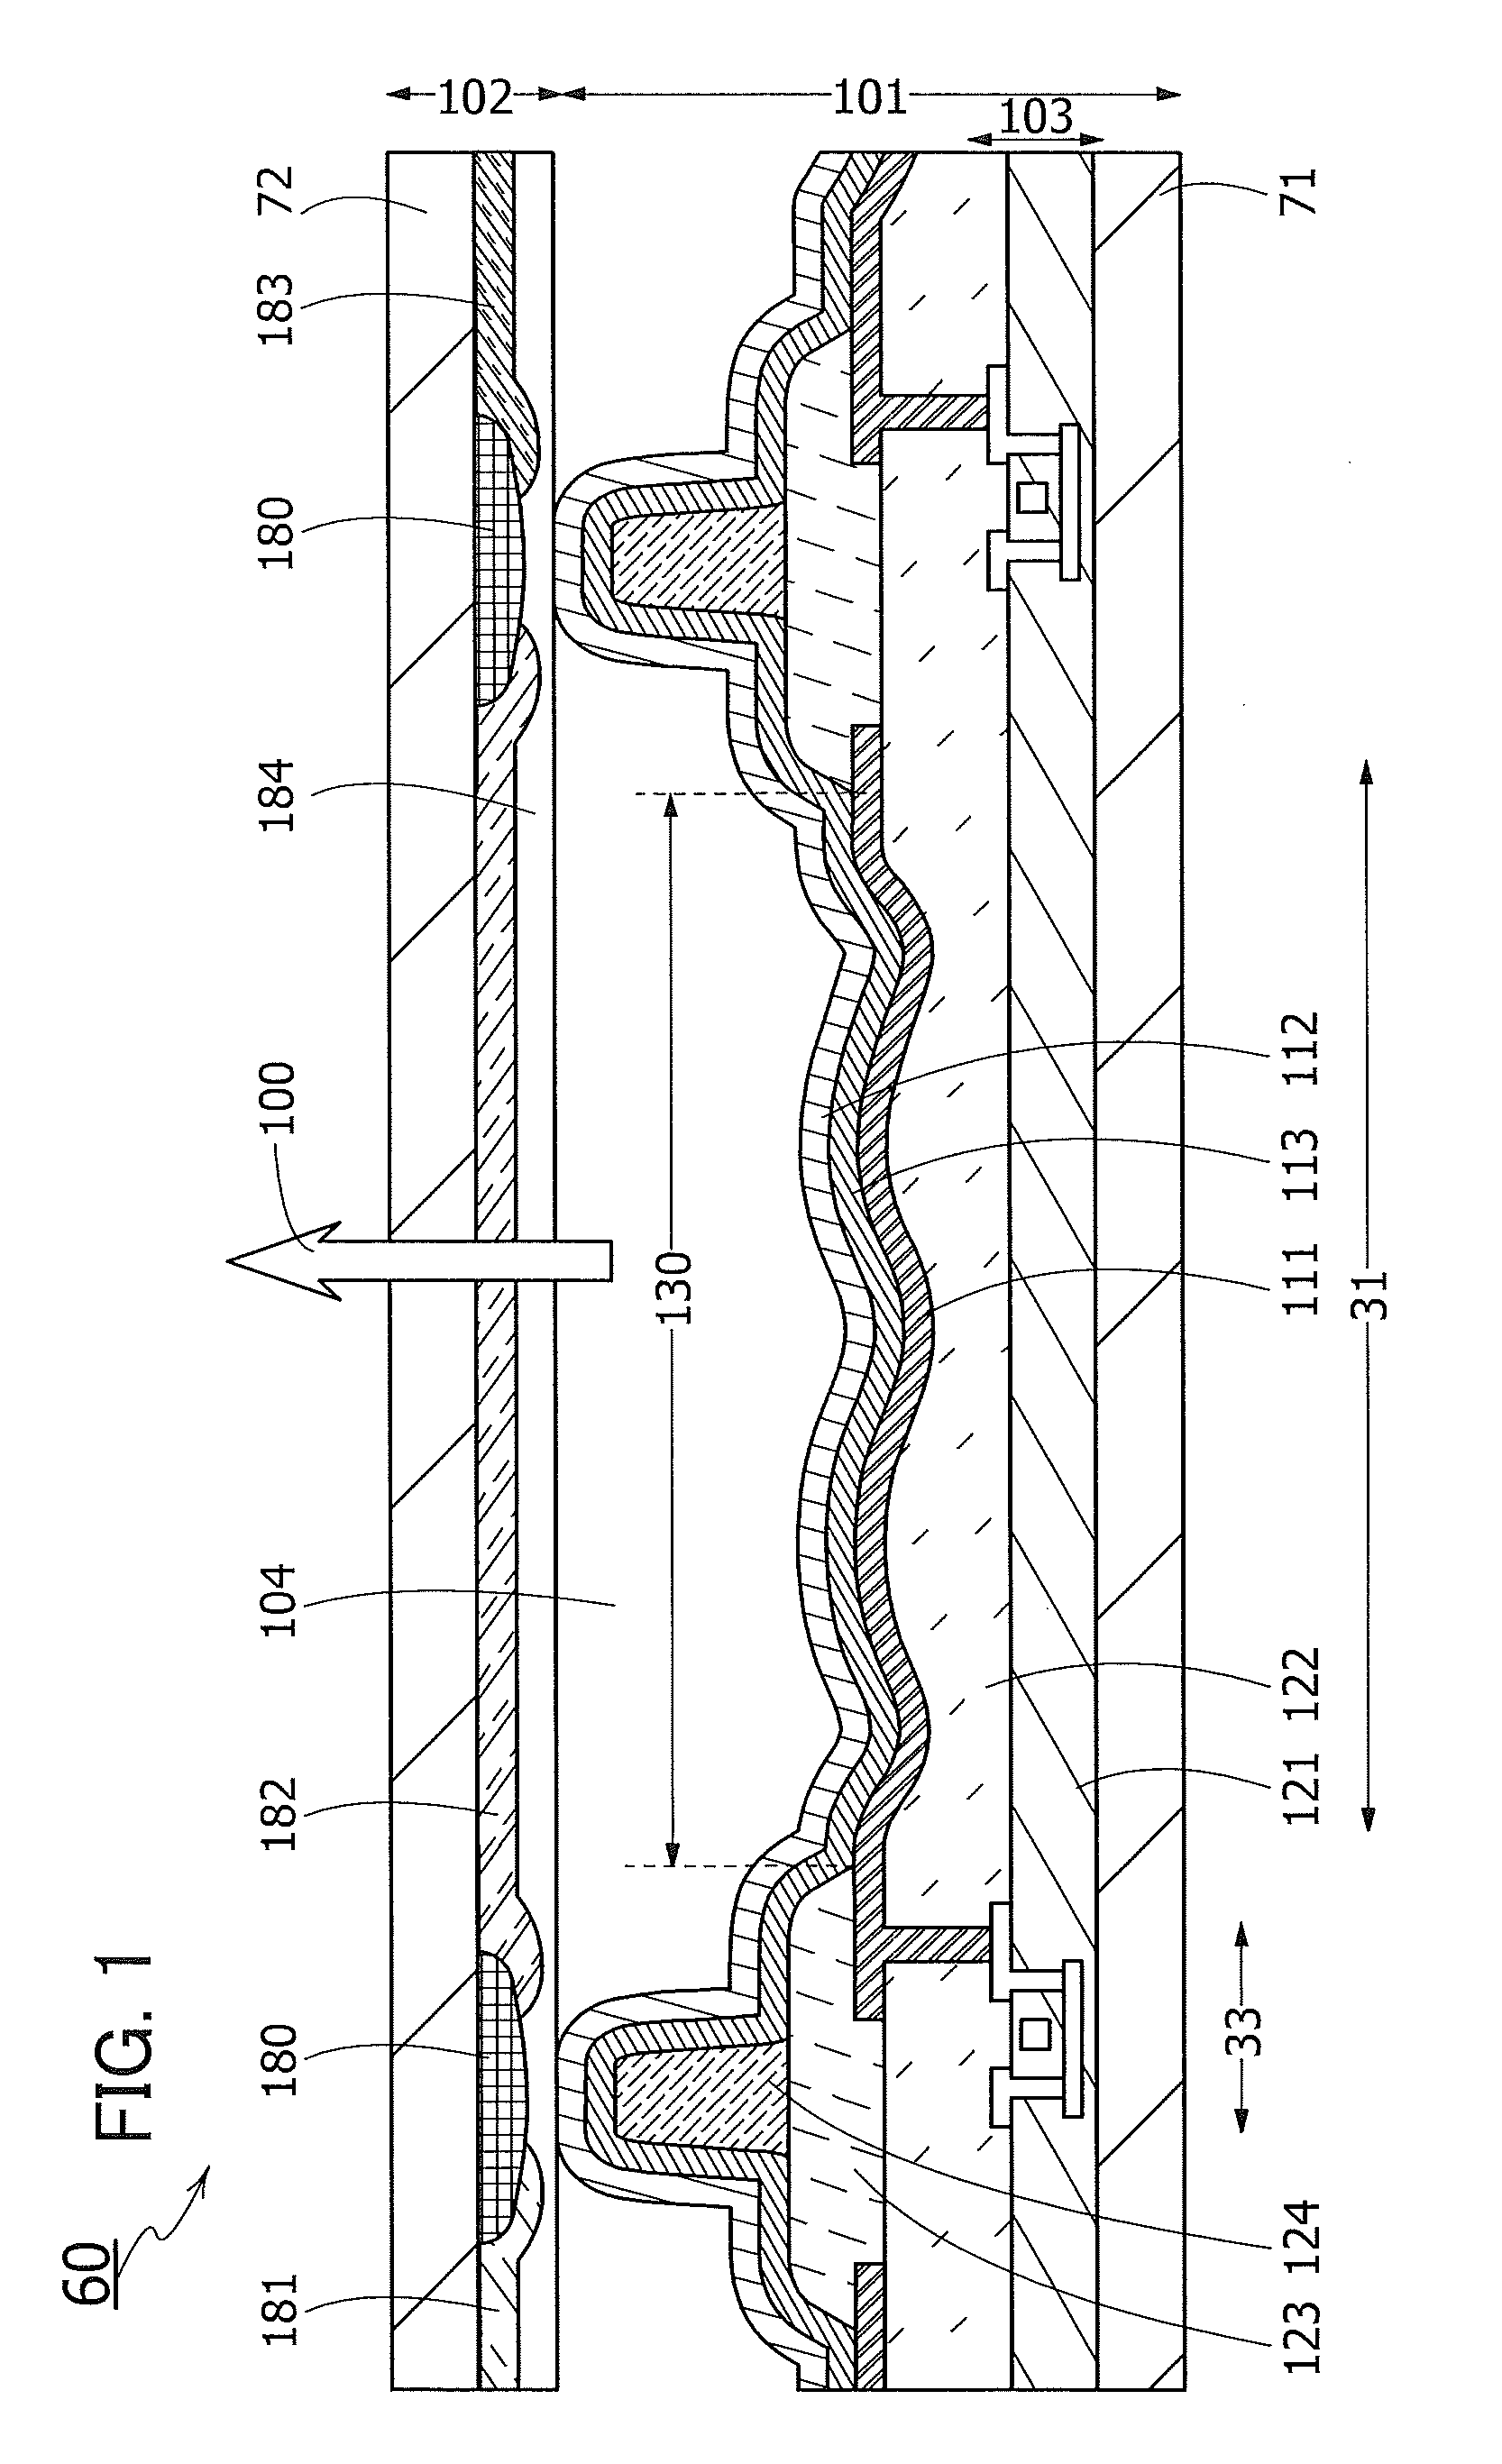 Light-emitting device having an electrode with depressions